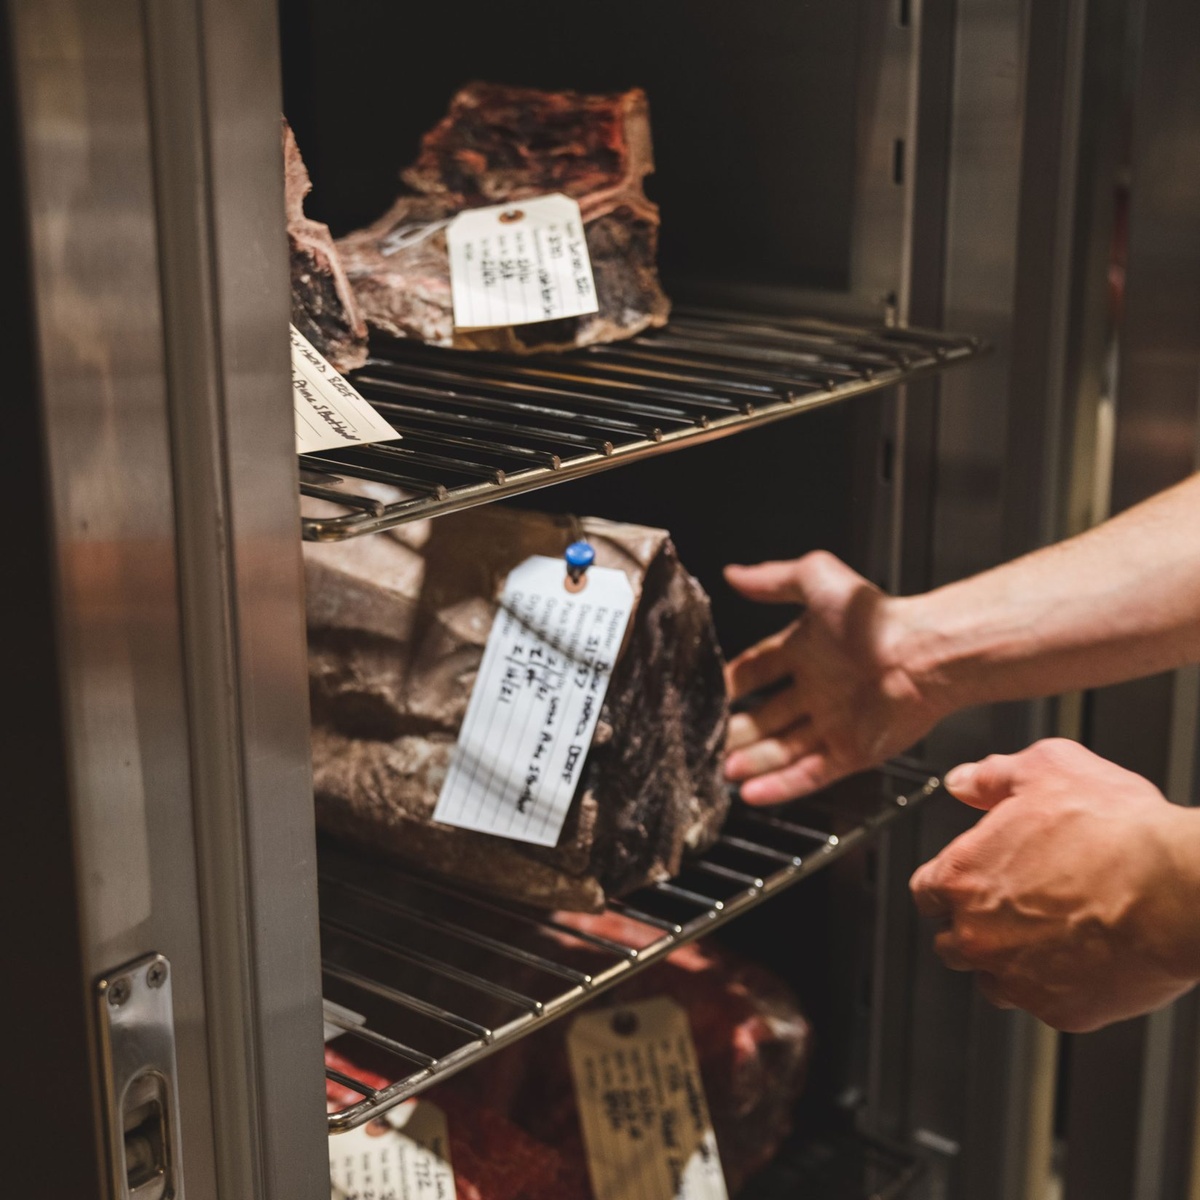 Chef selecting premium steak cut in the steakhouse kitchen.